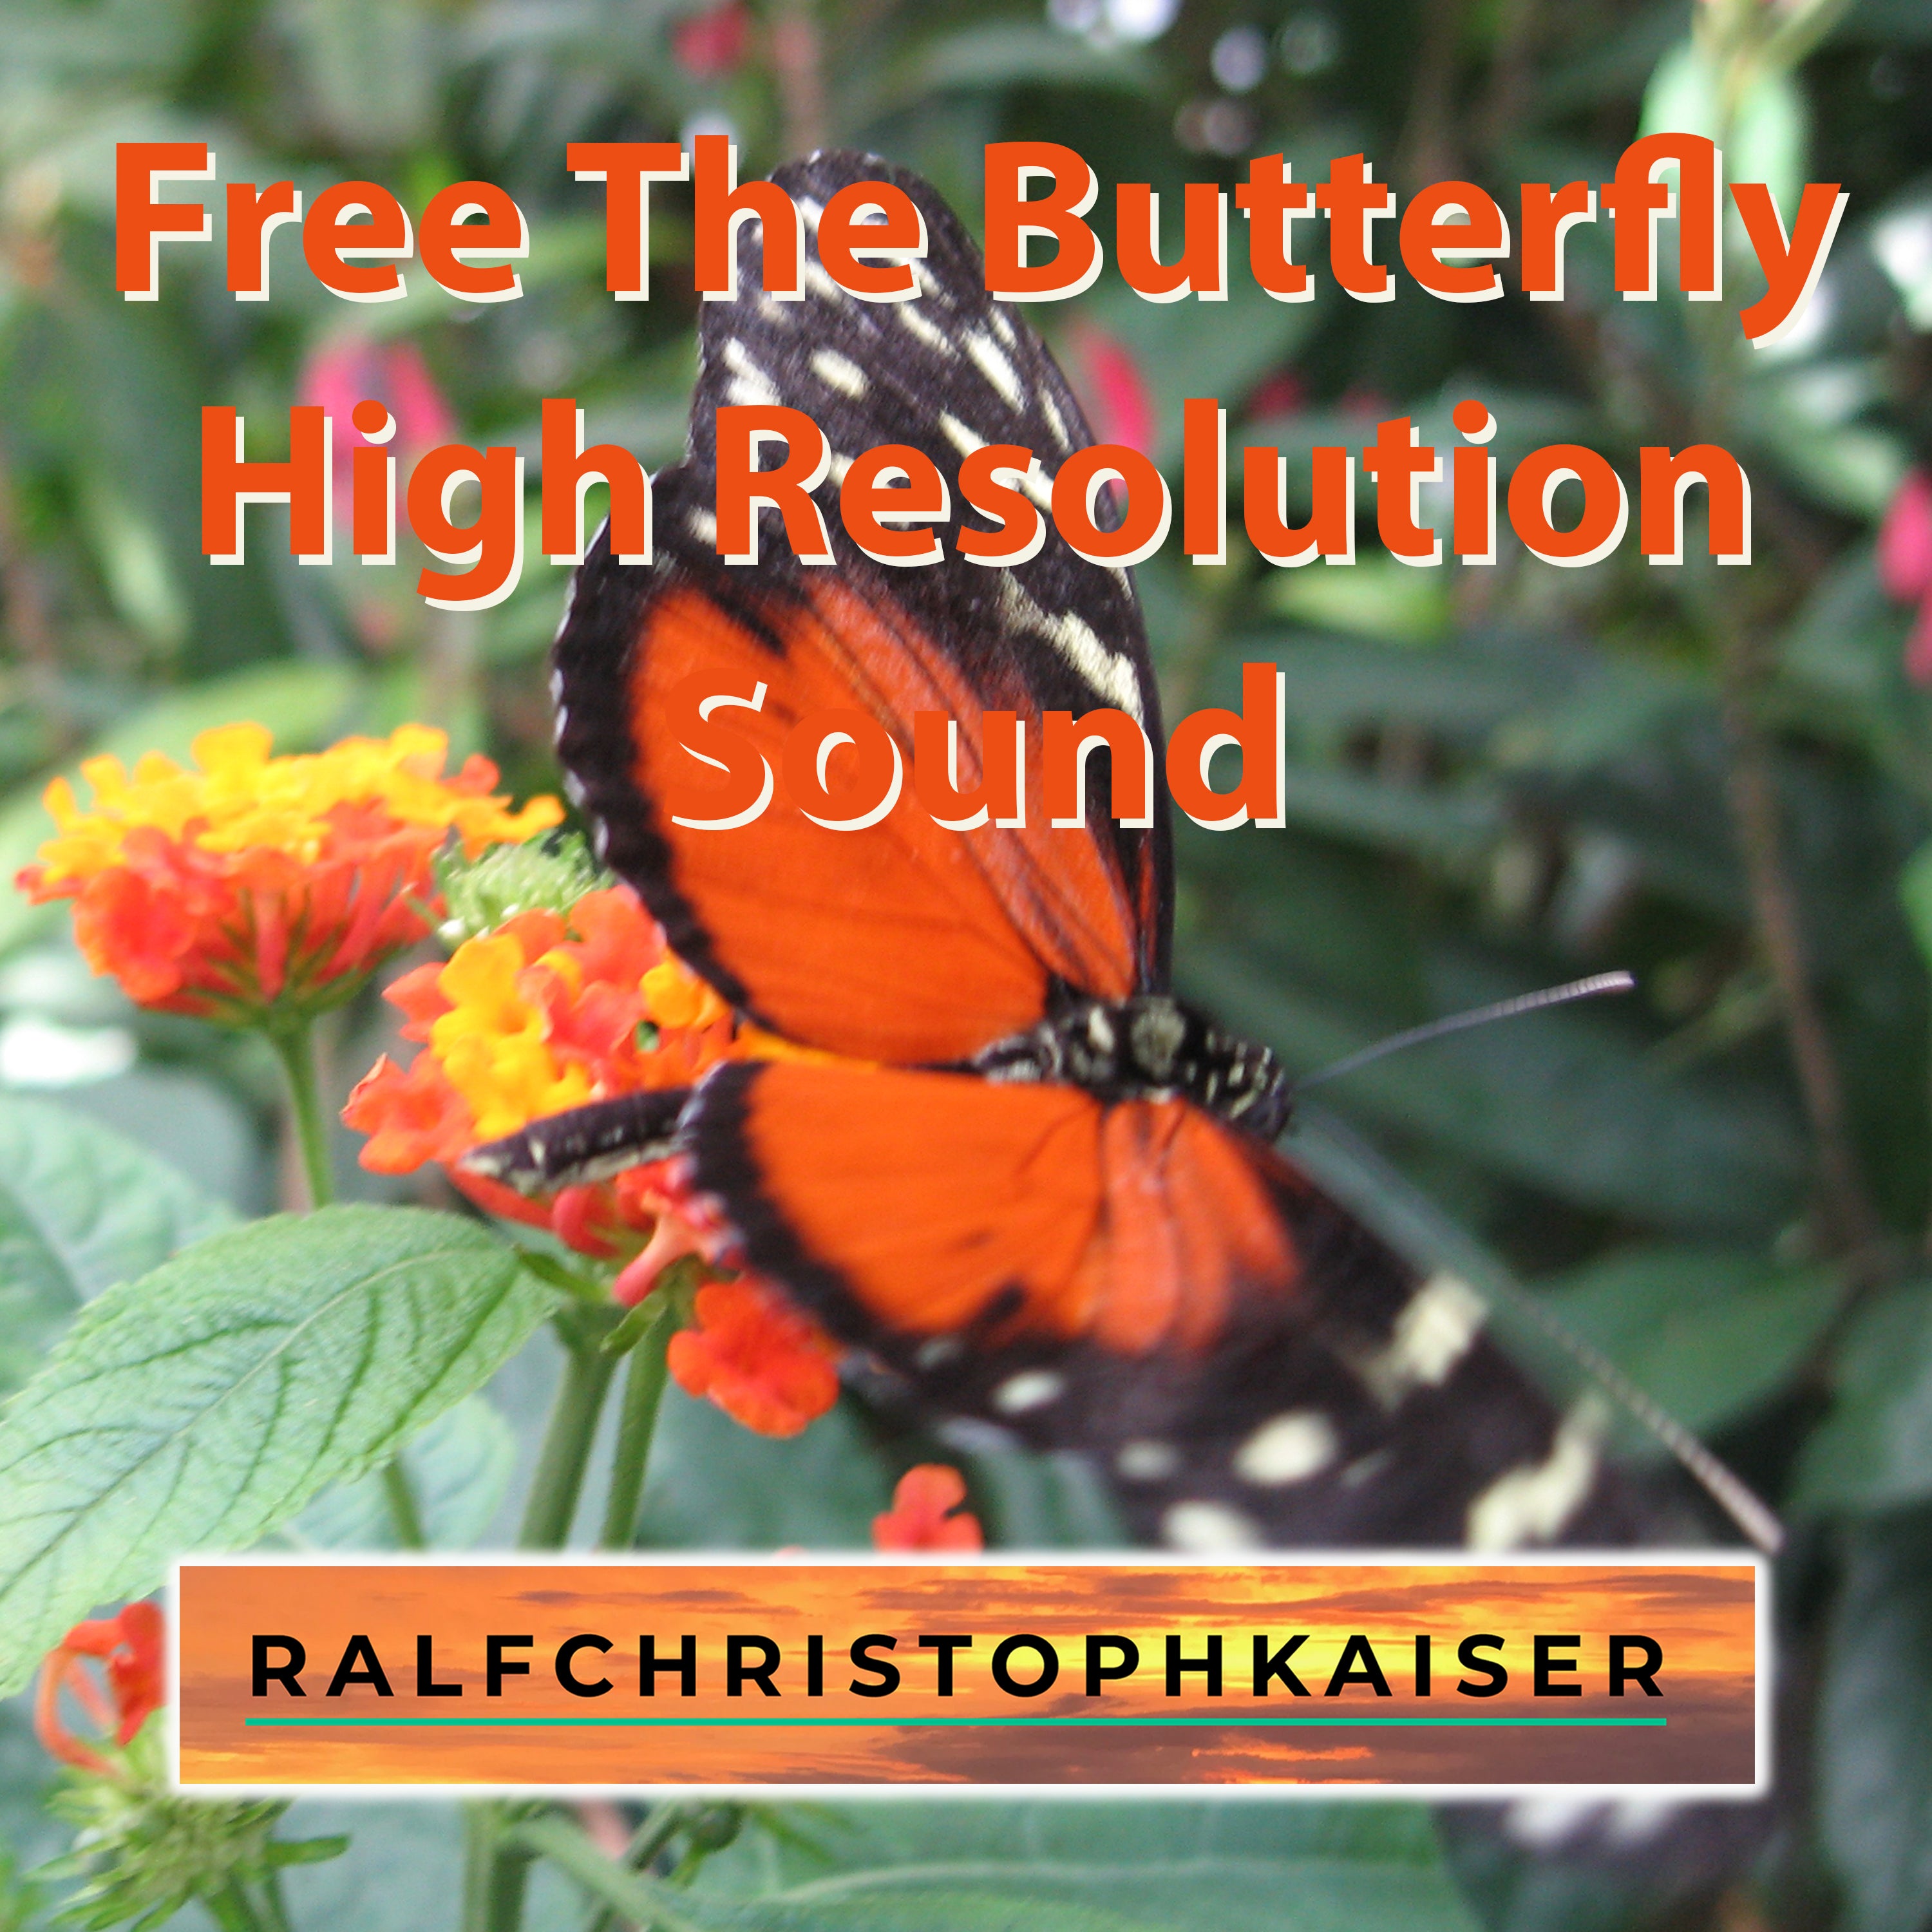 Free The Butterfly Electronica EP by Ralf Christoph Kaiser.com in High Resolution Sound nearly HD Sound (Explicit Content) - ralfchristophkaiser.com Musik und Noten